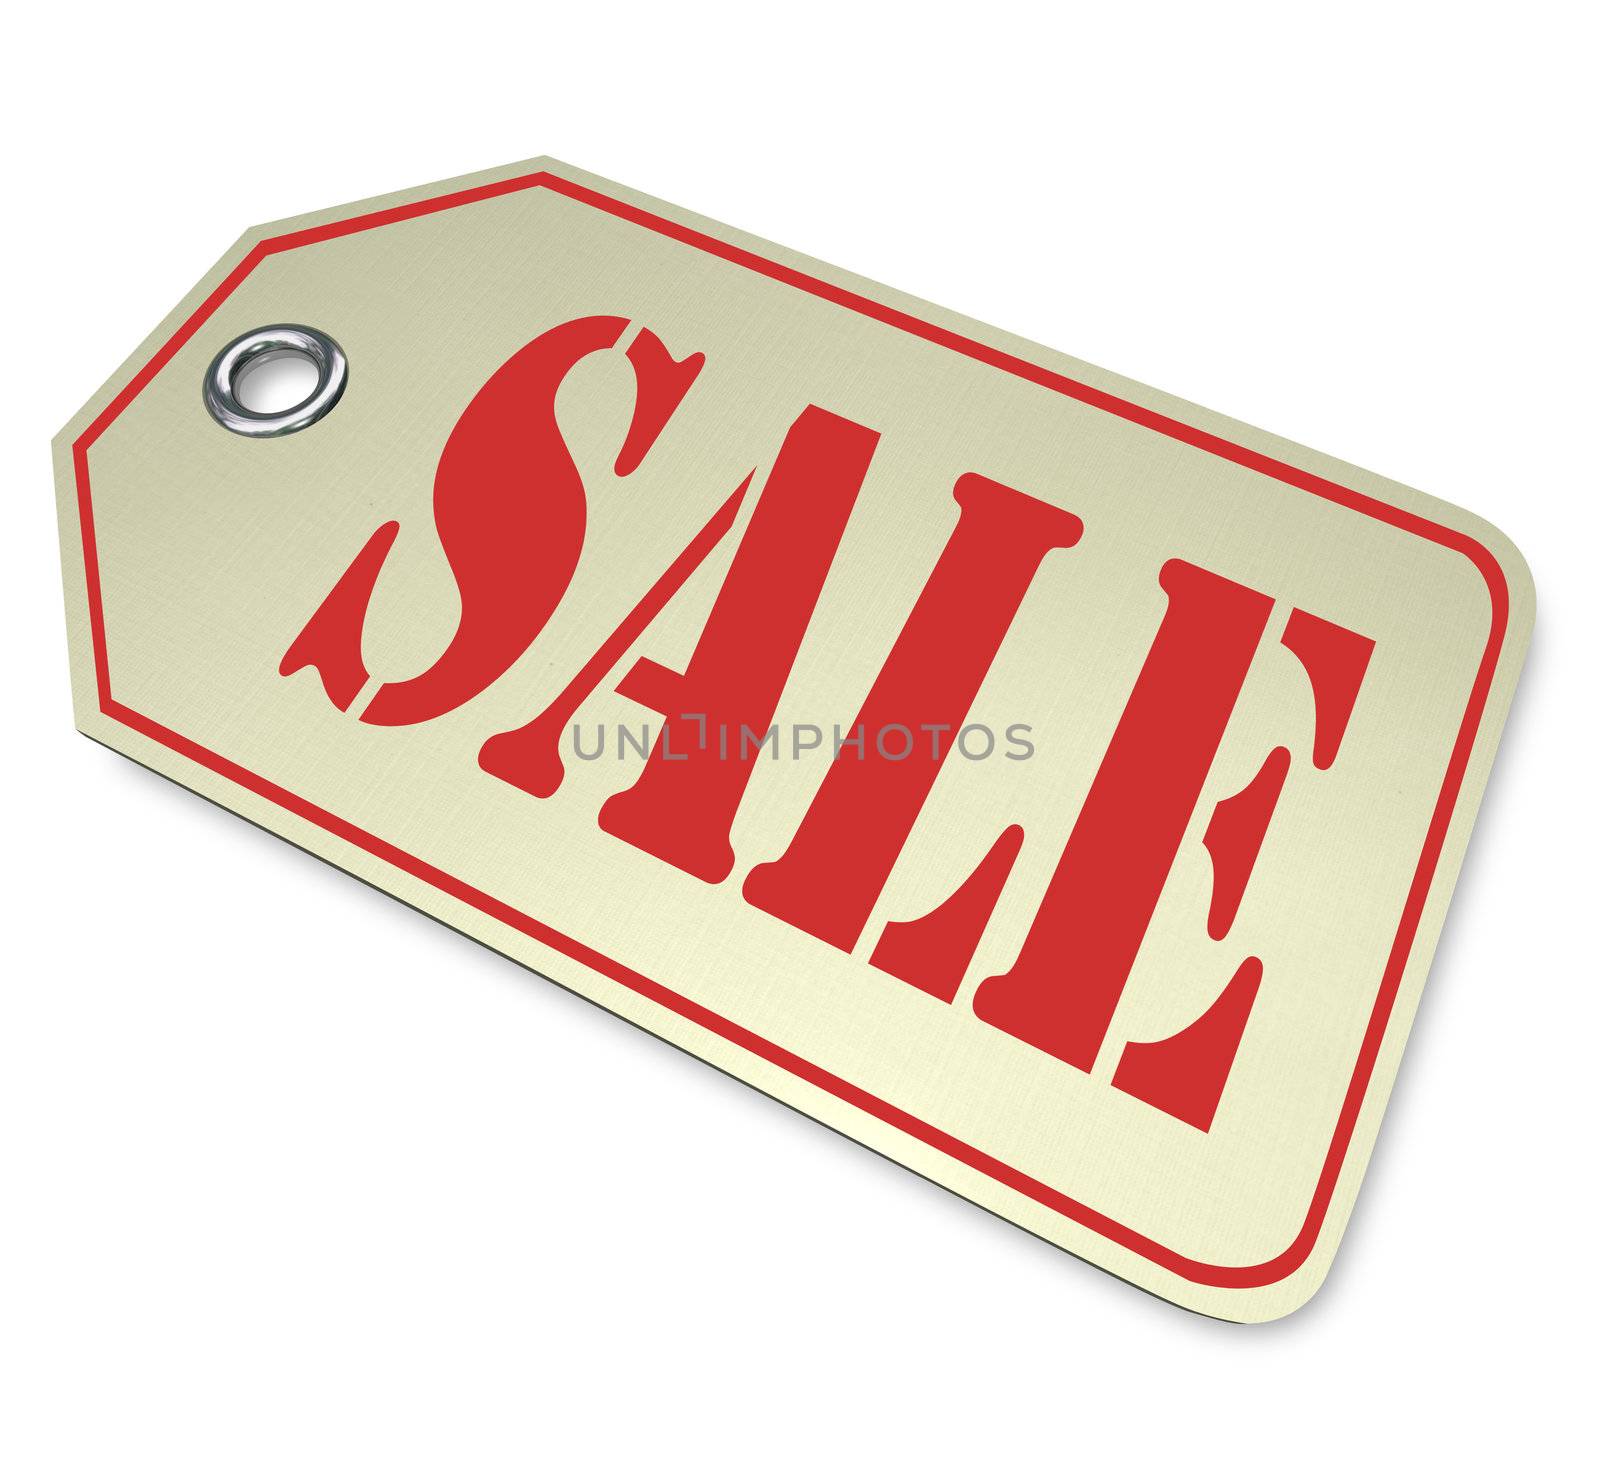 A price tag with the word Sale, illustrating a reduced discount or markdown on merchandise during a limited-time clearance event at a store or online retailer